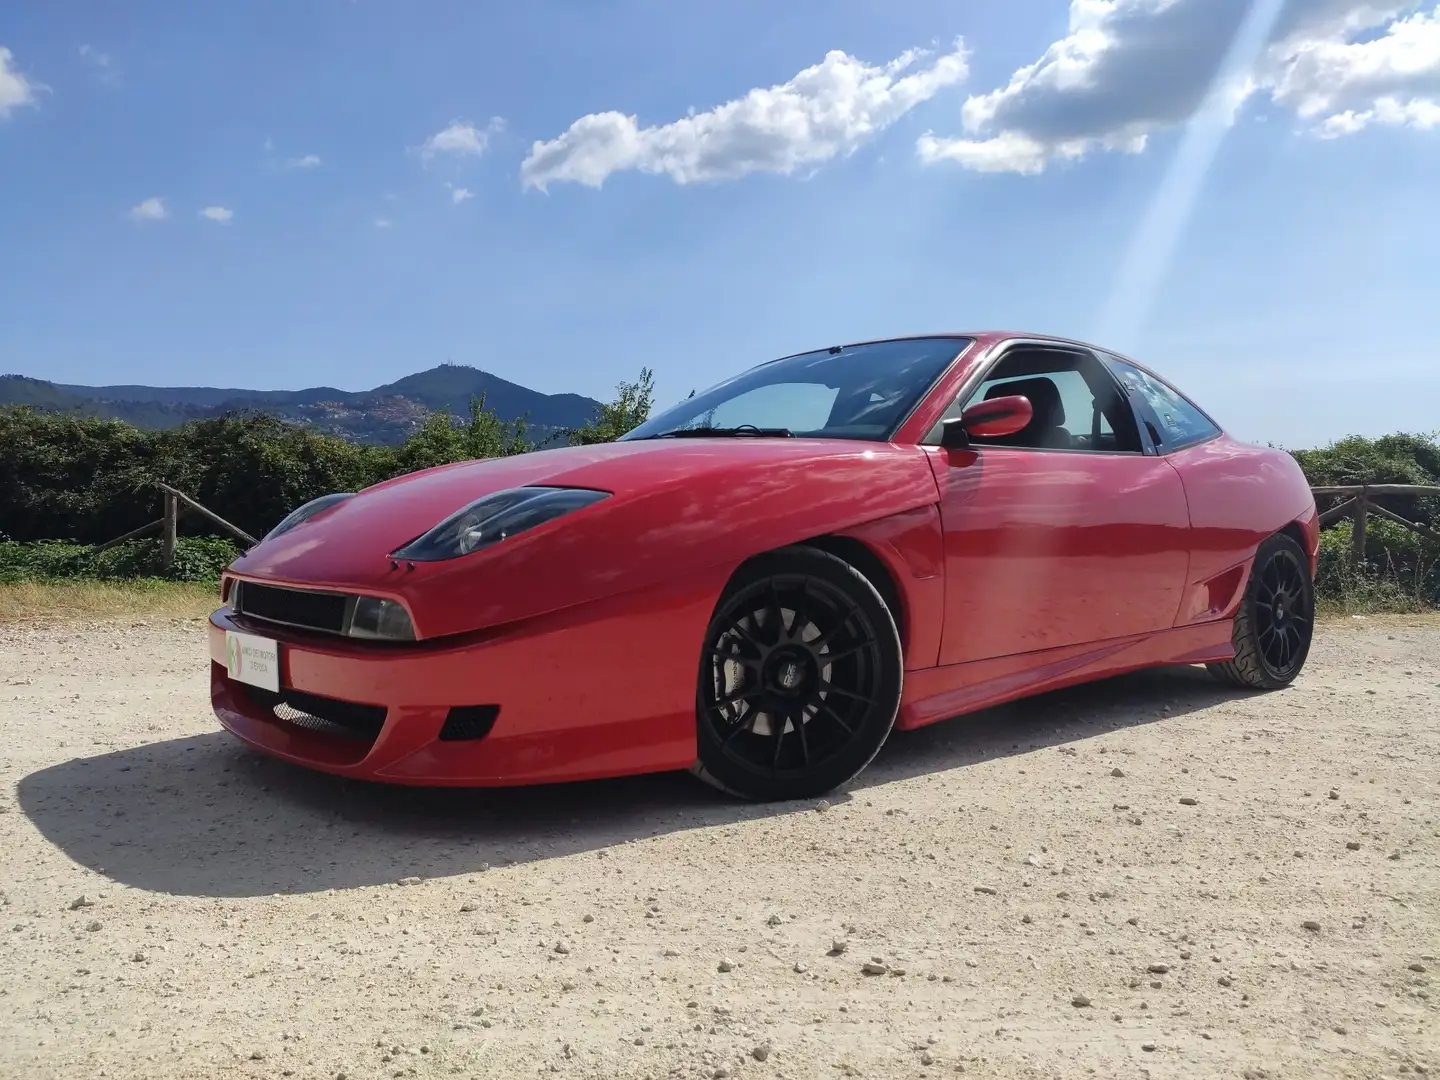 Fiat Coupe 2.0 16v turbo Rosso - 1